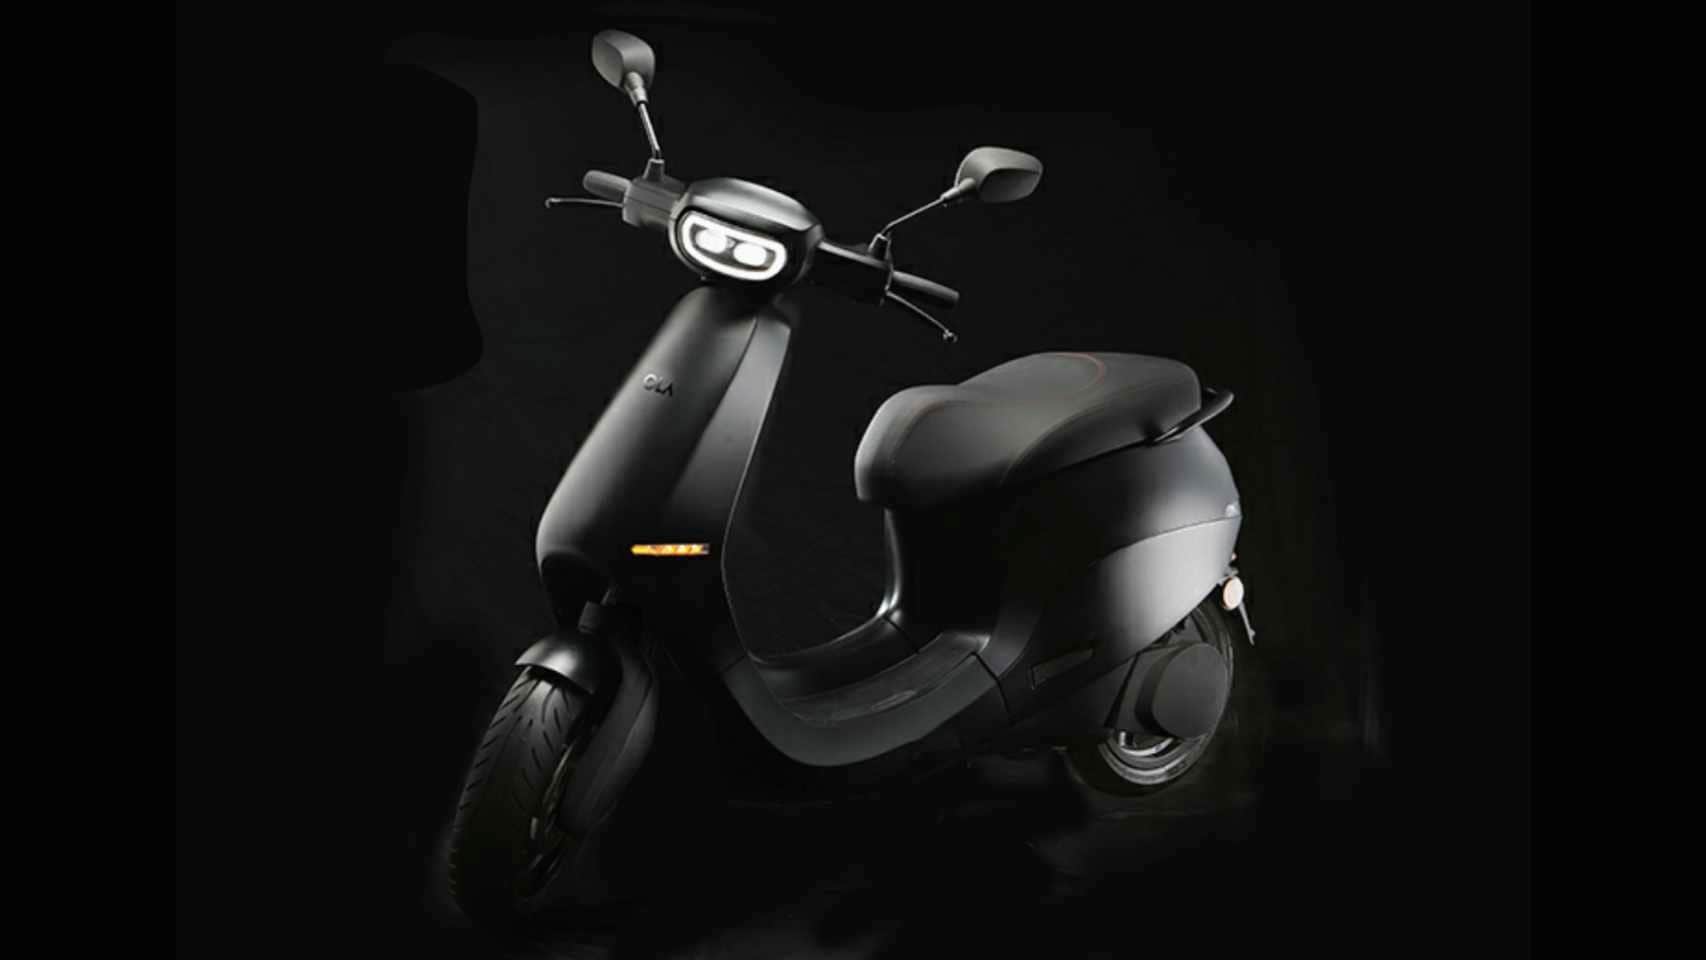 The Ola electric scooter's motor is expected to produce over 8 hp and up to 50 Nm of torque. Image: Ola Electric